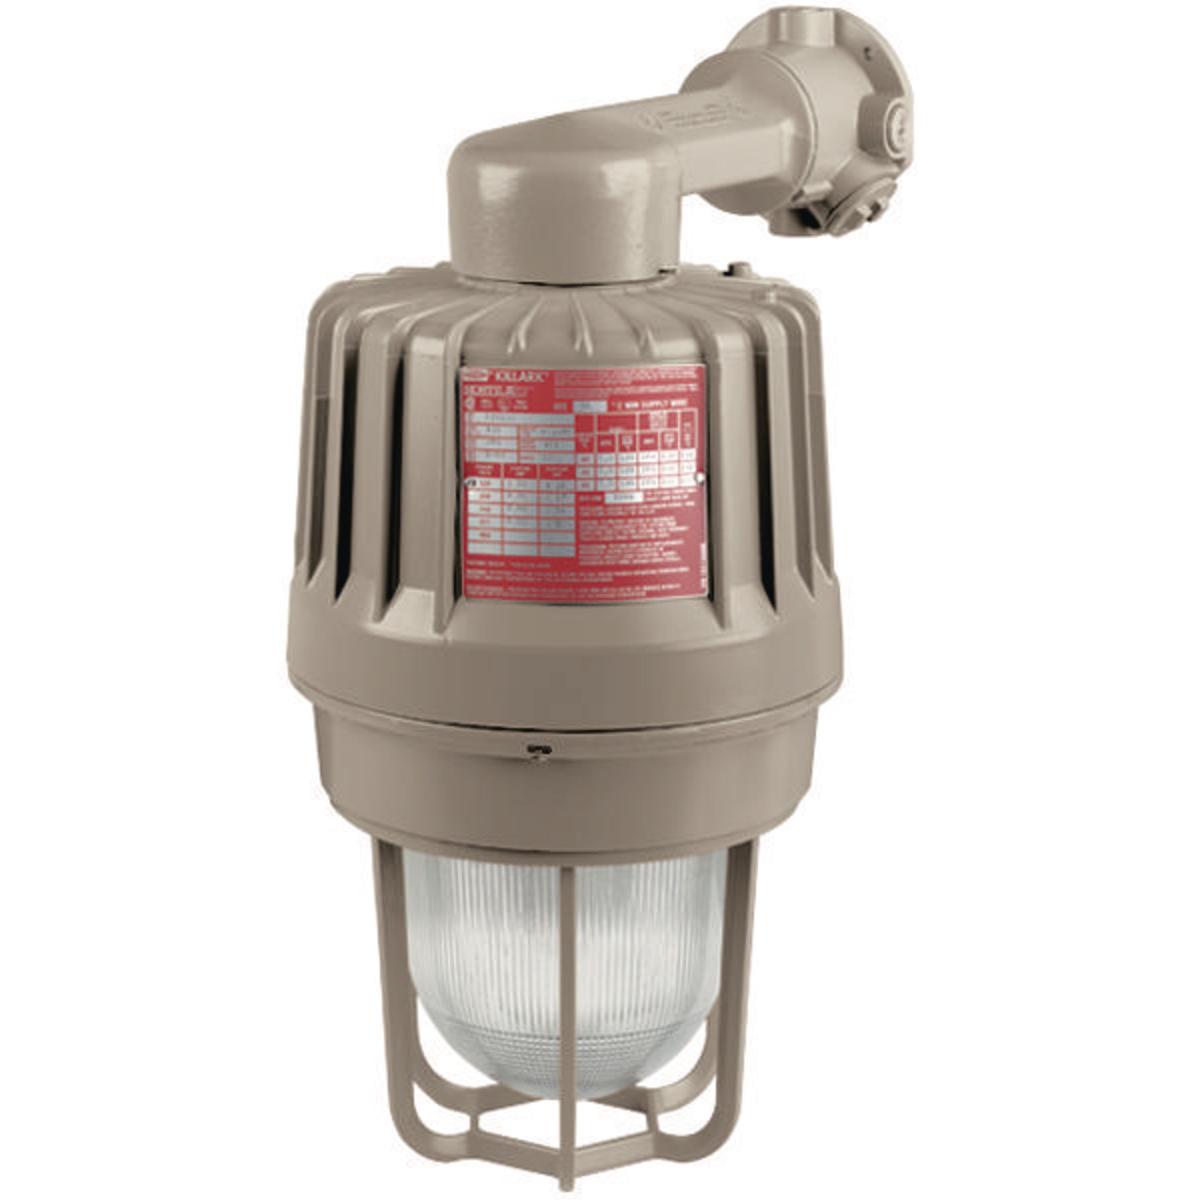 Hubbell EZS405B2 HID 400W 480V High Pressure Sodium 3/4" Wall Mount  ; Three light sources – High Pressure Sodium (50-400W), Metal Halide (70-400W) and Pulse Start Metal Halide (175-400W) ; Mounting choice –Pendant, ceiling, 25˚ stanchion or 90˚ wall mount, all with “wire